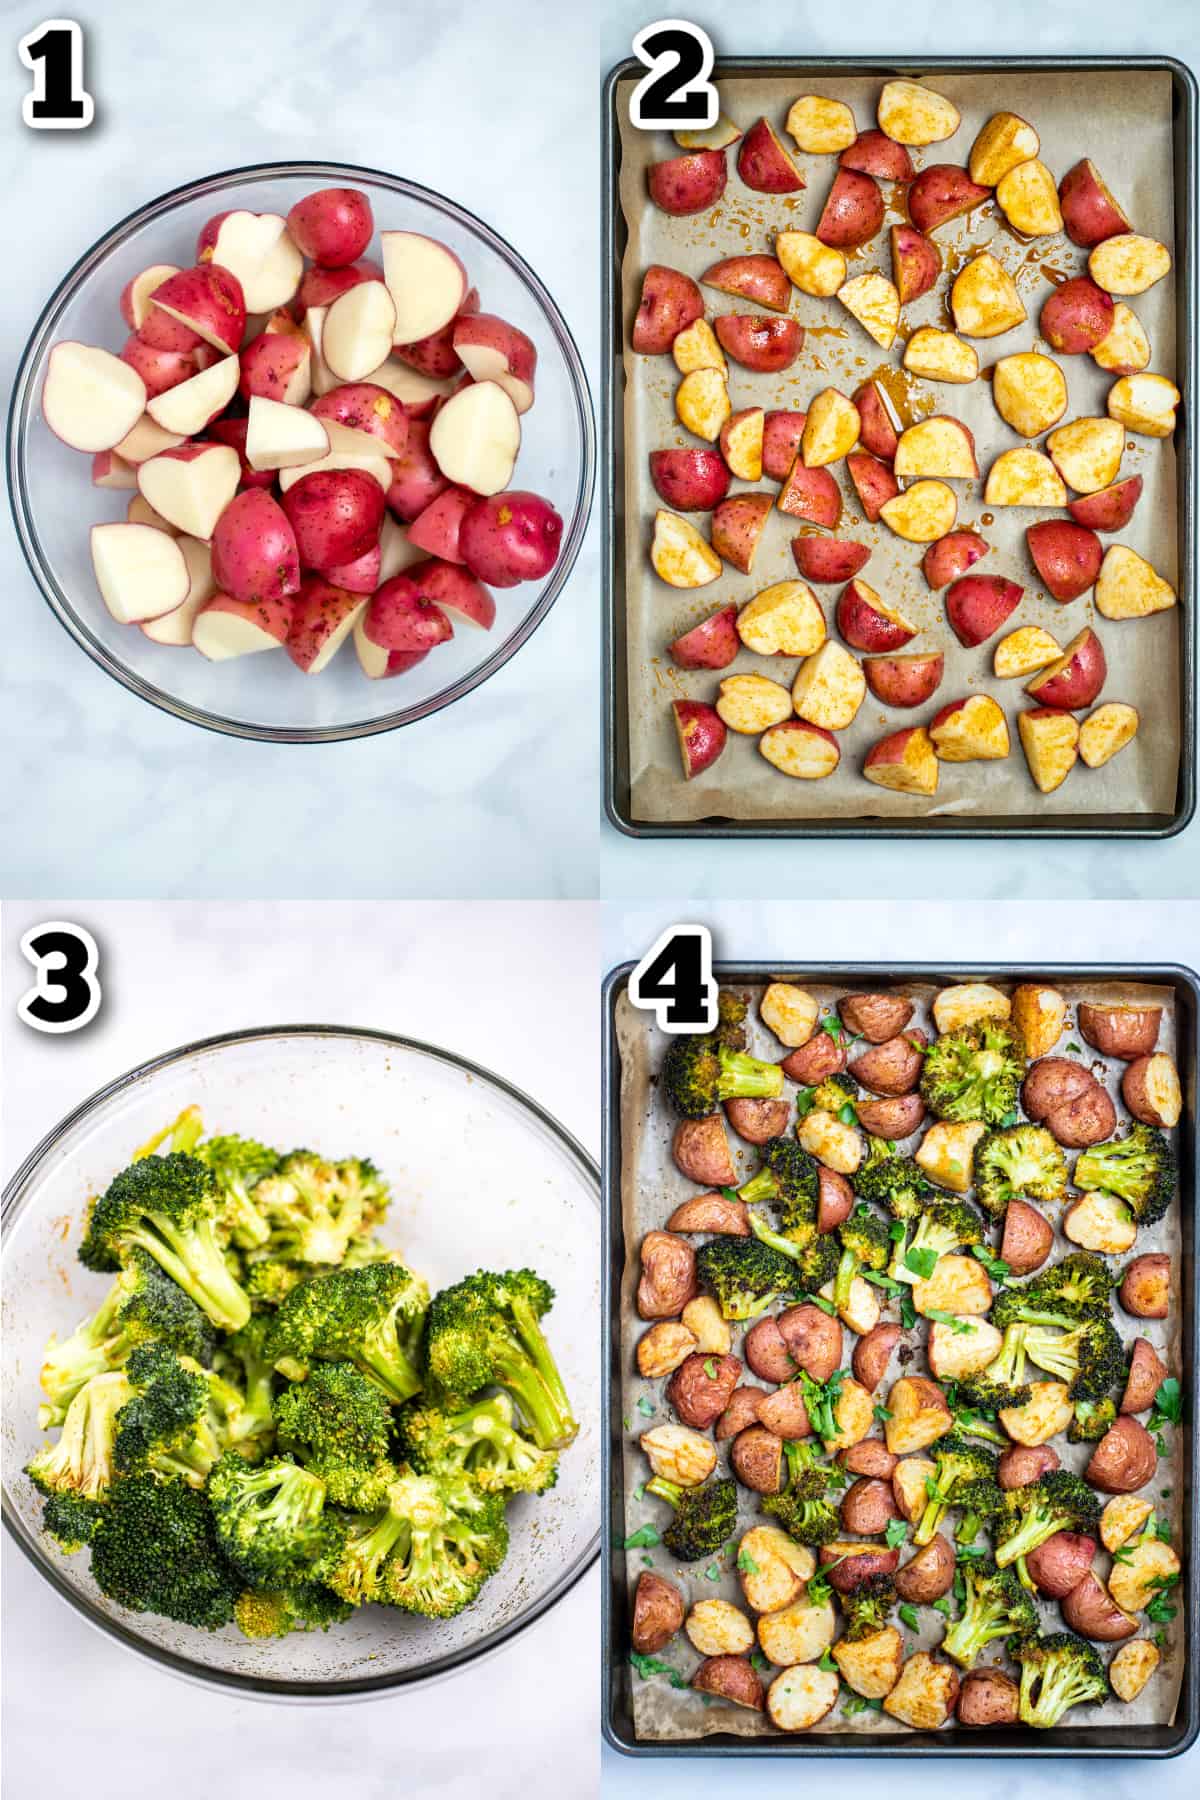 step by step photos for how to make roasted potatoes and broccoli.